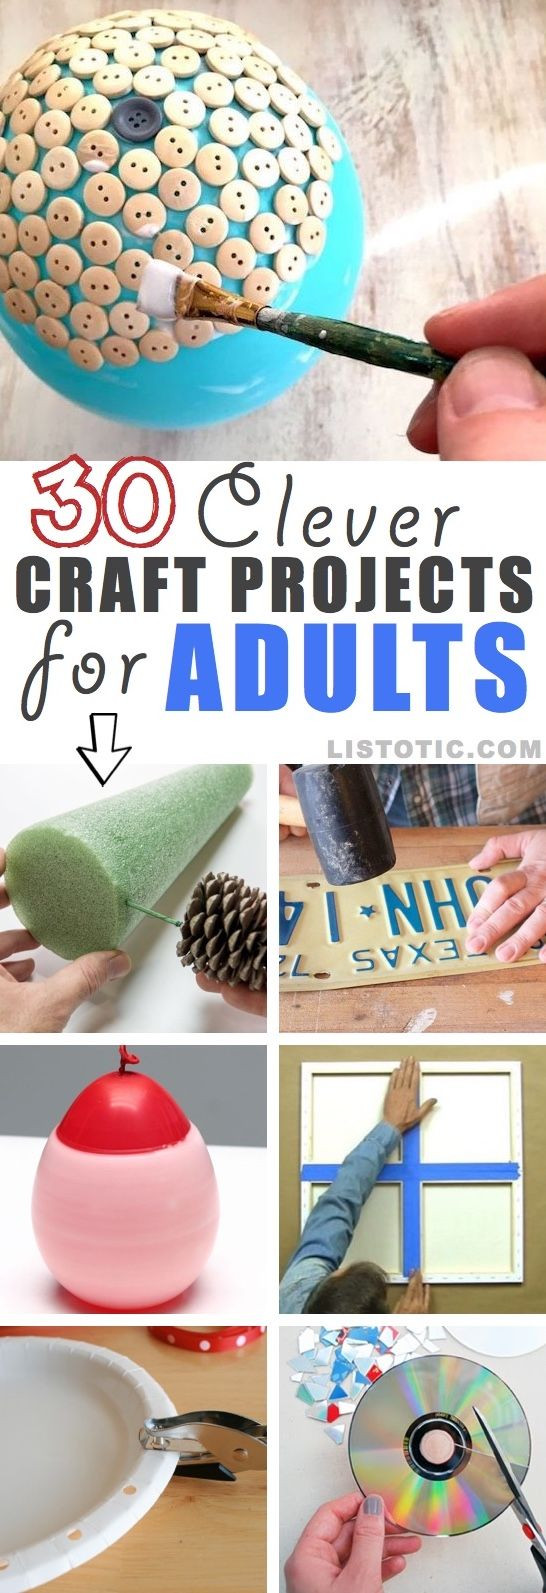 Home Craft Ideas For Adults
 Easy DIY craft ideas for adults and teens for the home